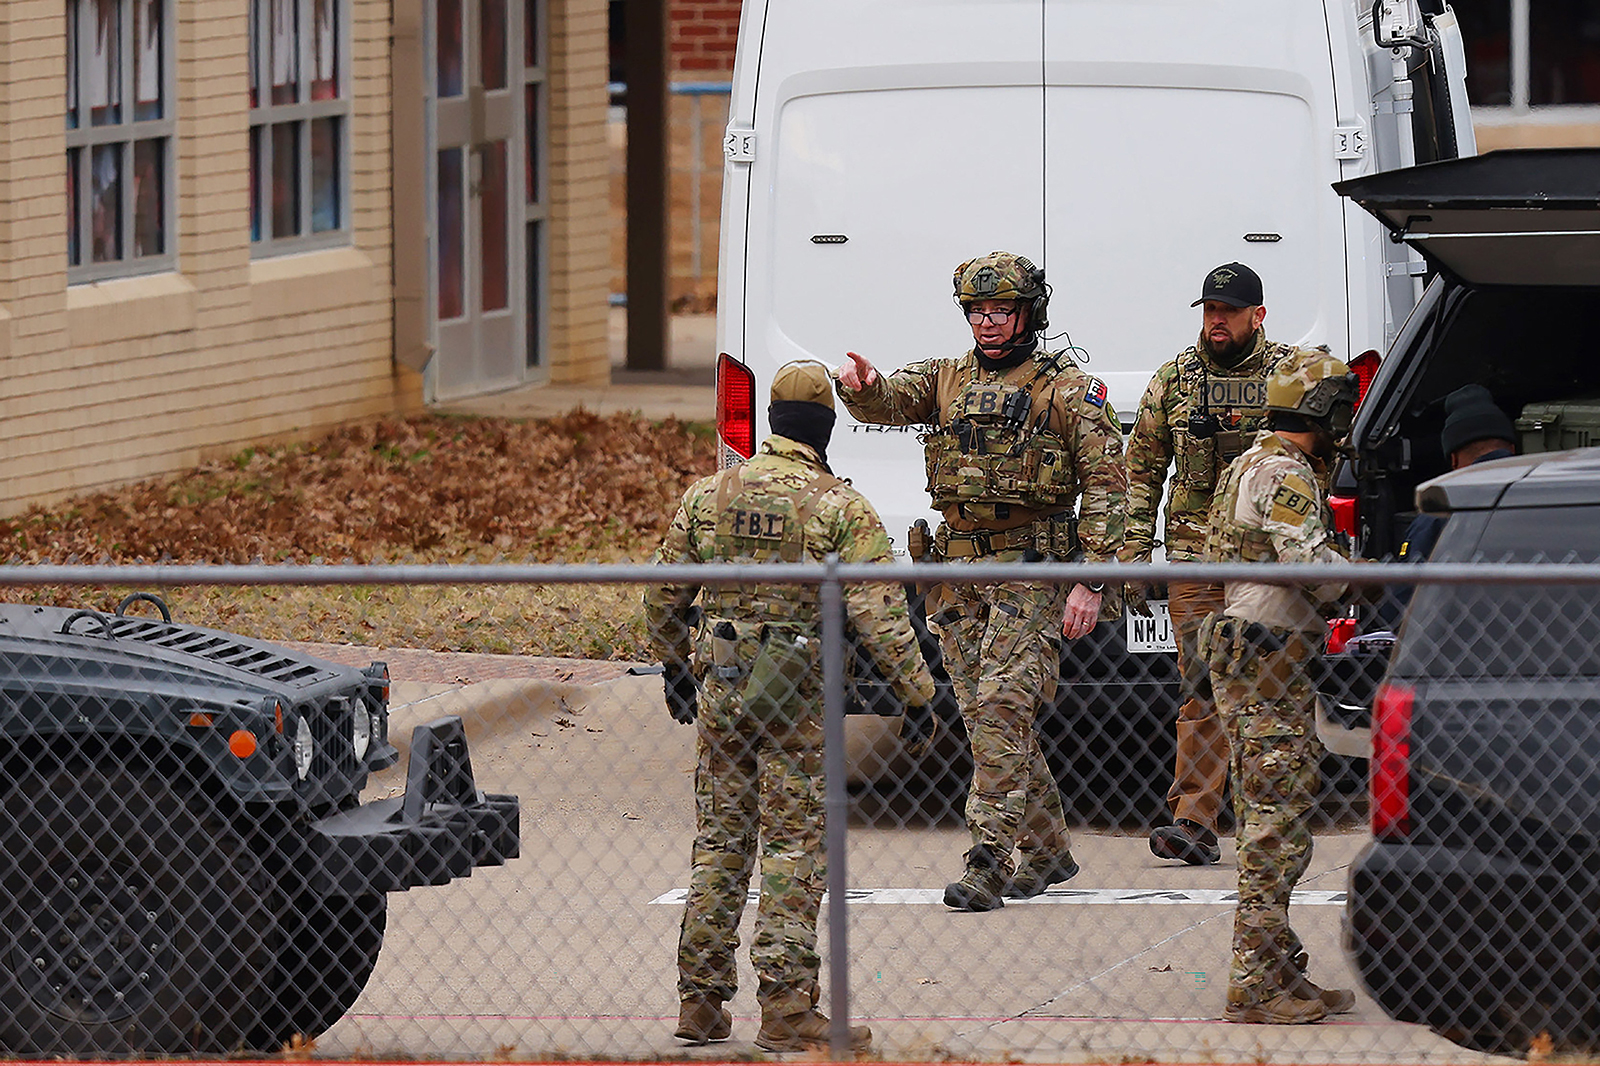 SWAT team members deploy near the Congregation Beth Israel Synagogue in Colleyville, Texas, some 25 miles (40 kilometers) west of Dallas, on January 15.